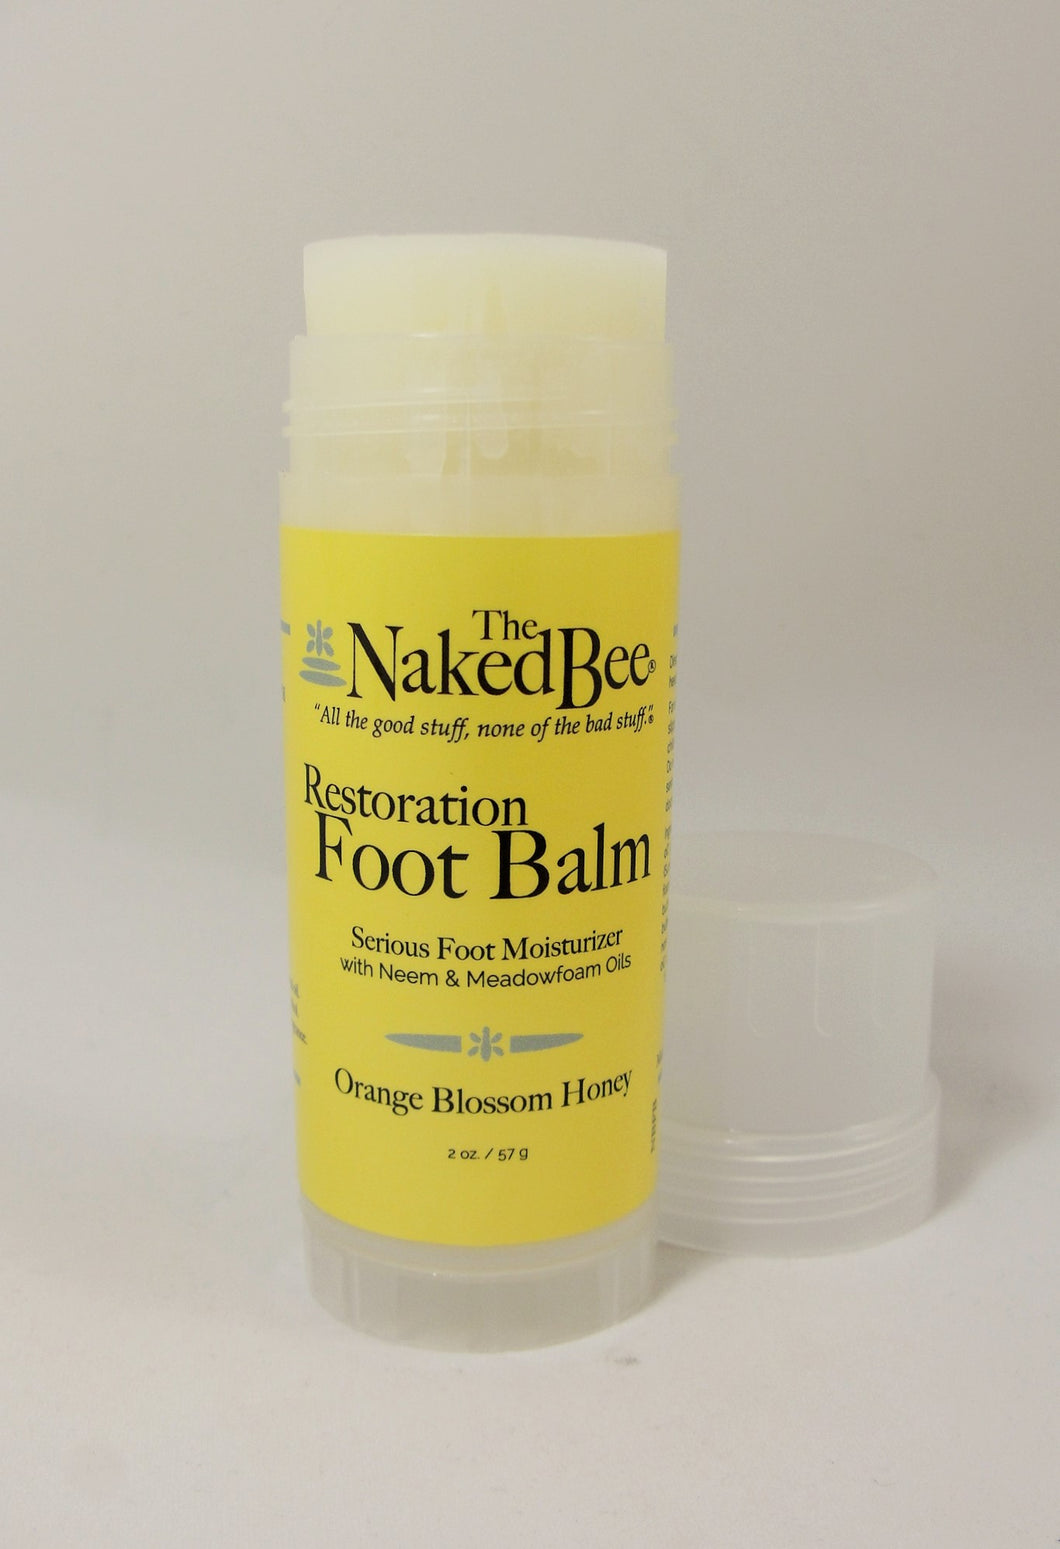 The Naked Bee Restoration Foot Balm 2oz